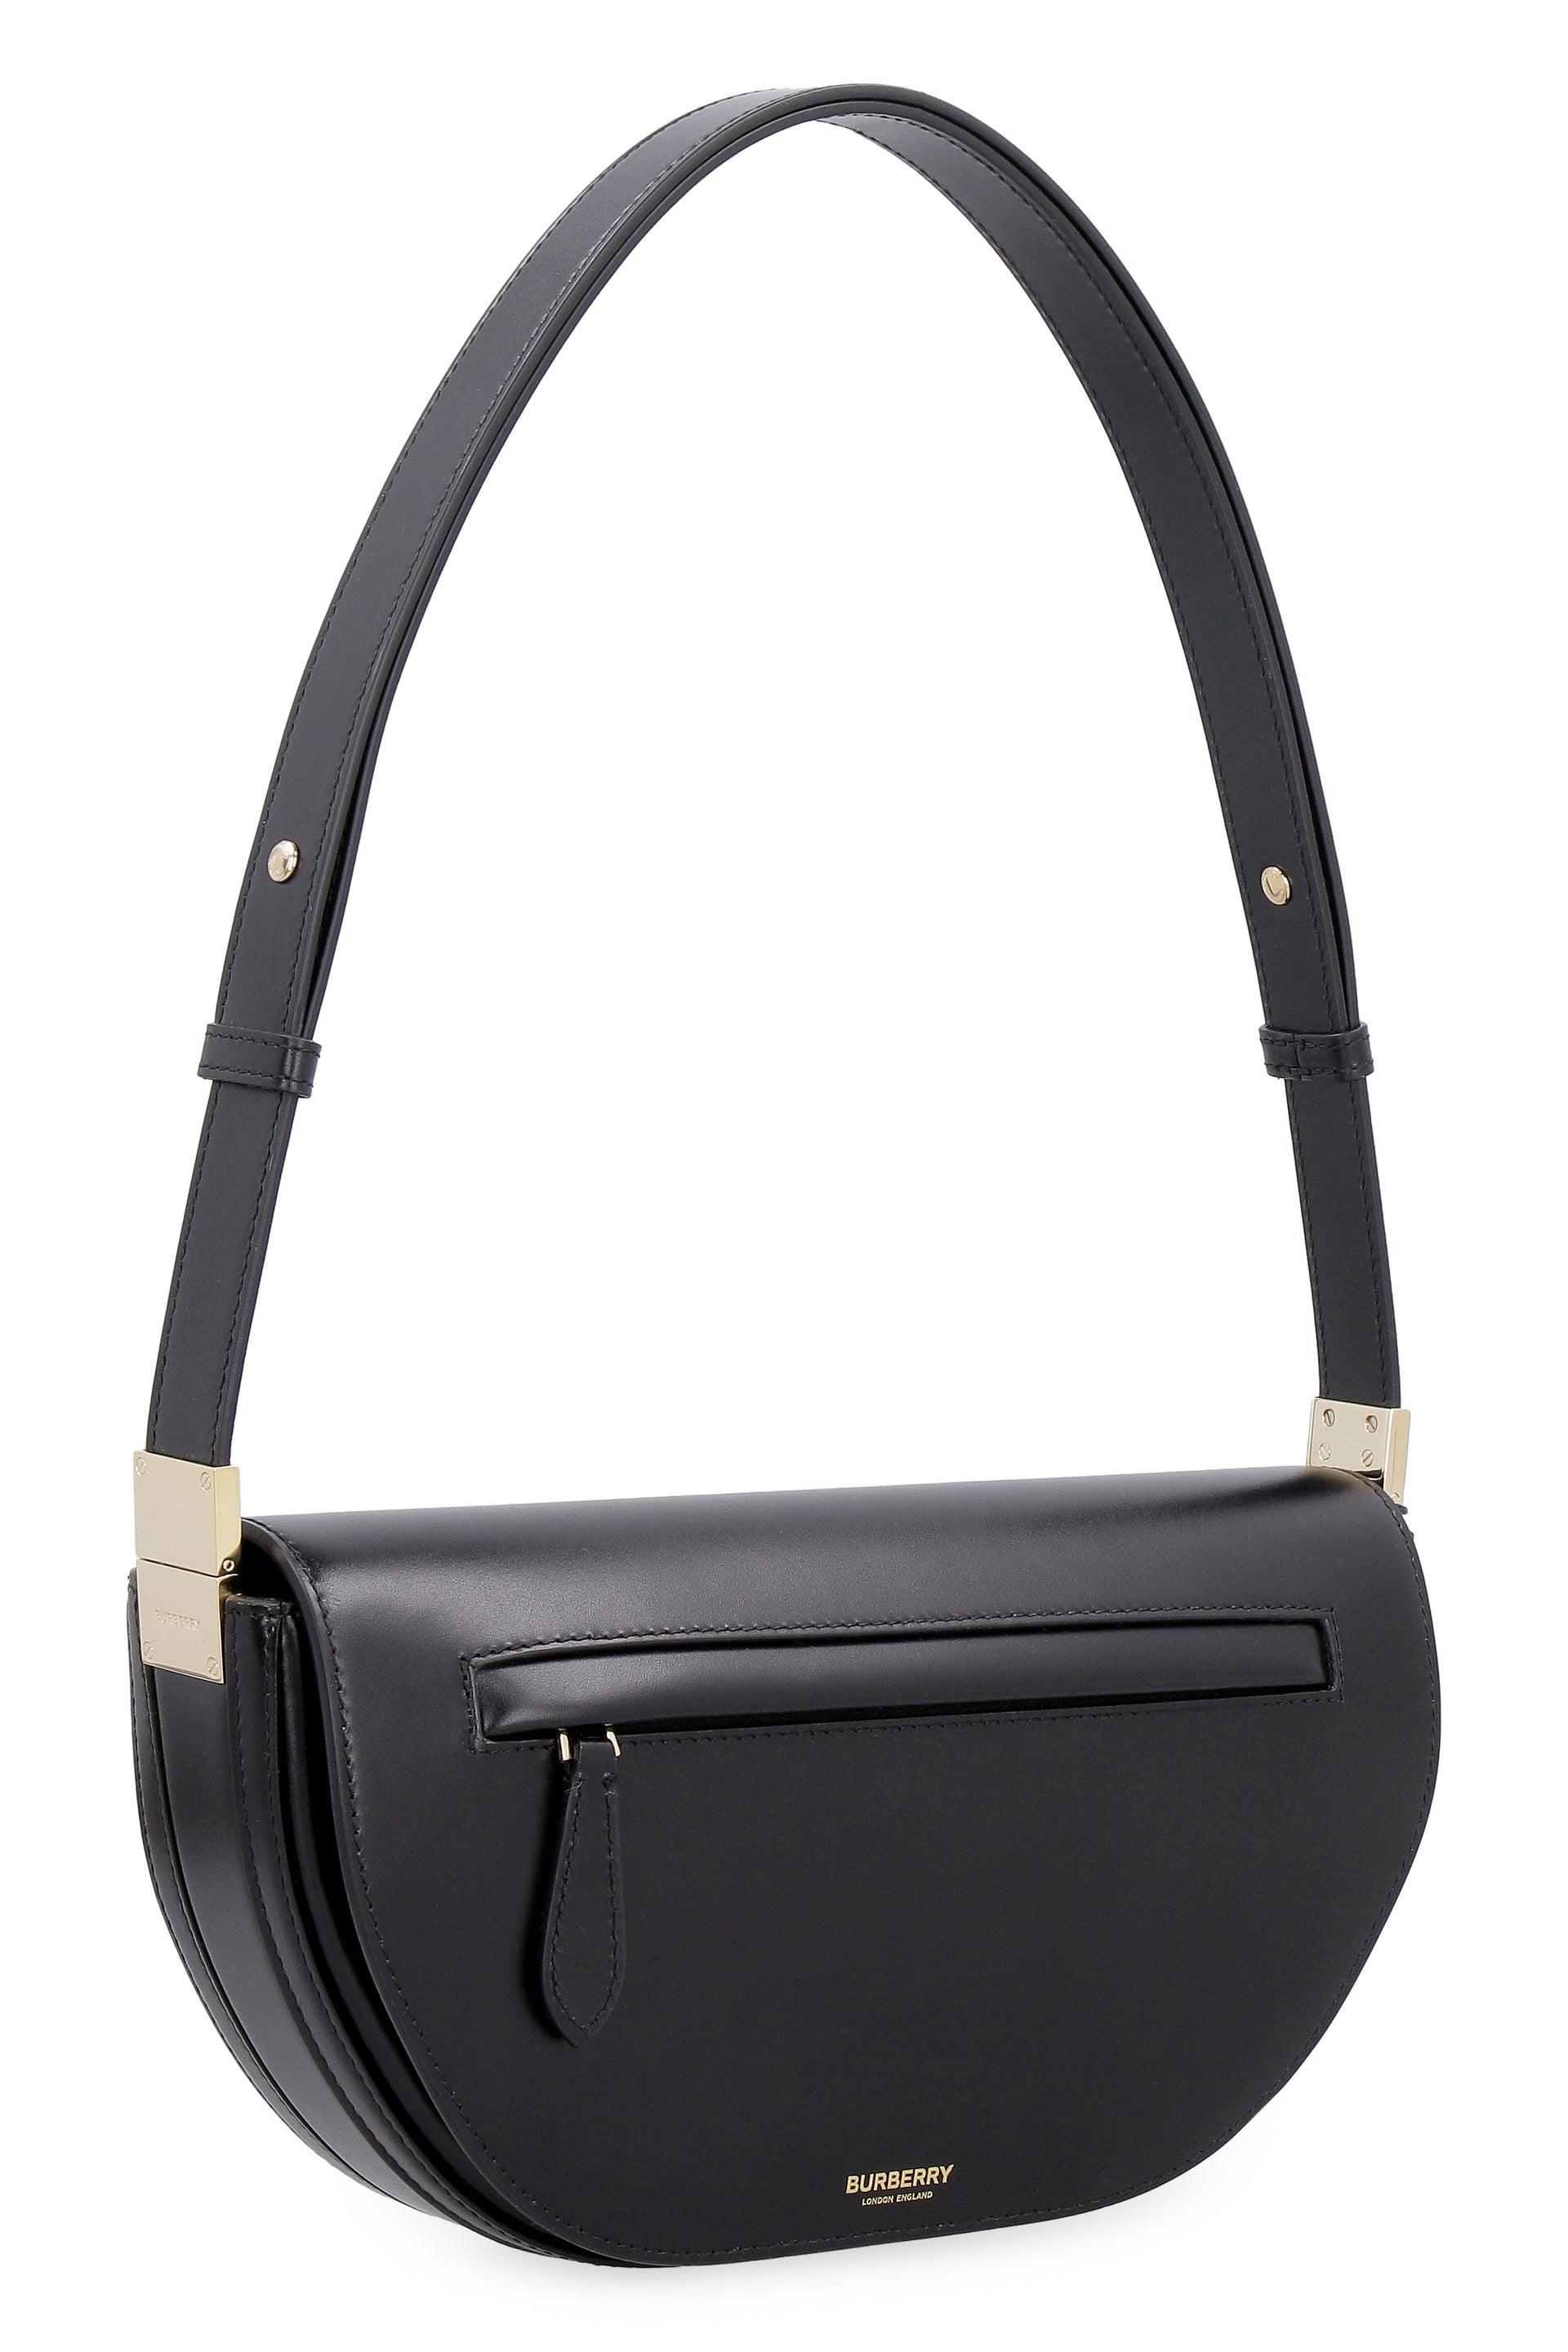 Burberry Olympia Leather Small Bag in Black | Lyst